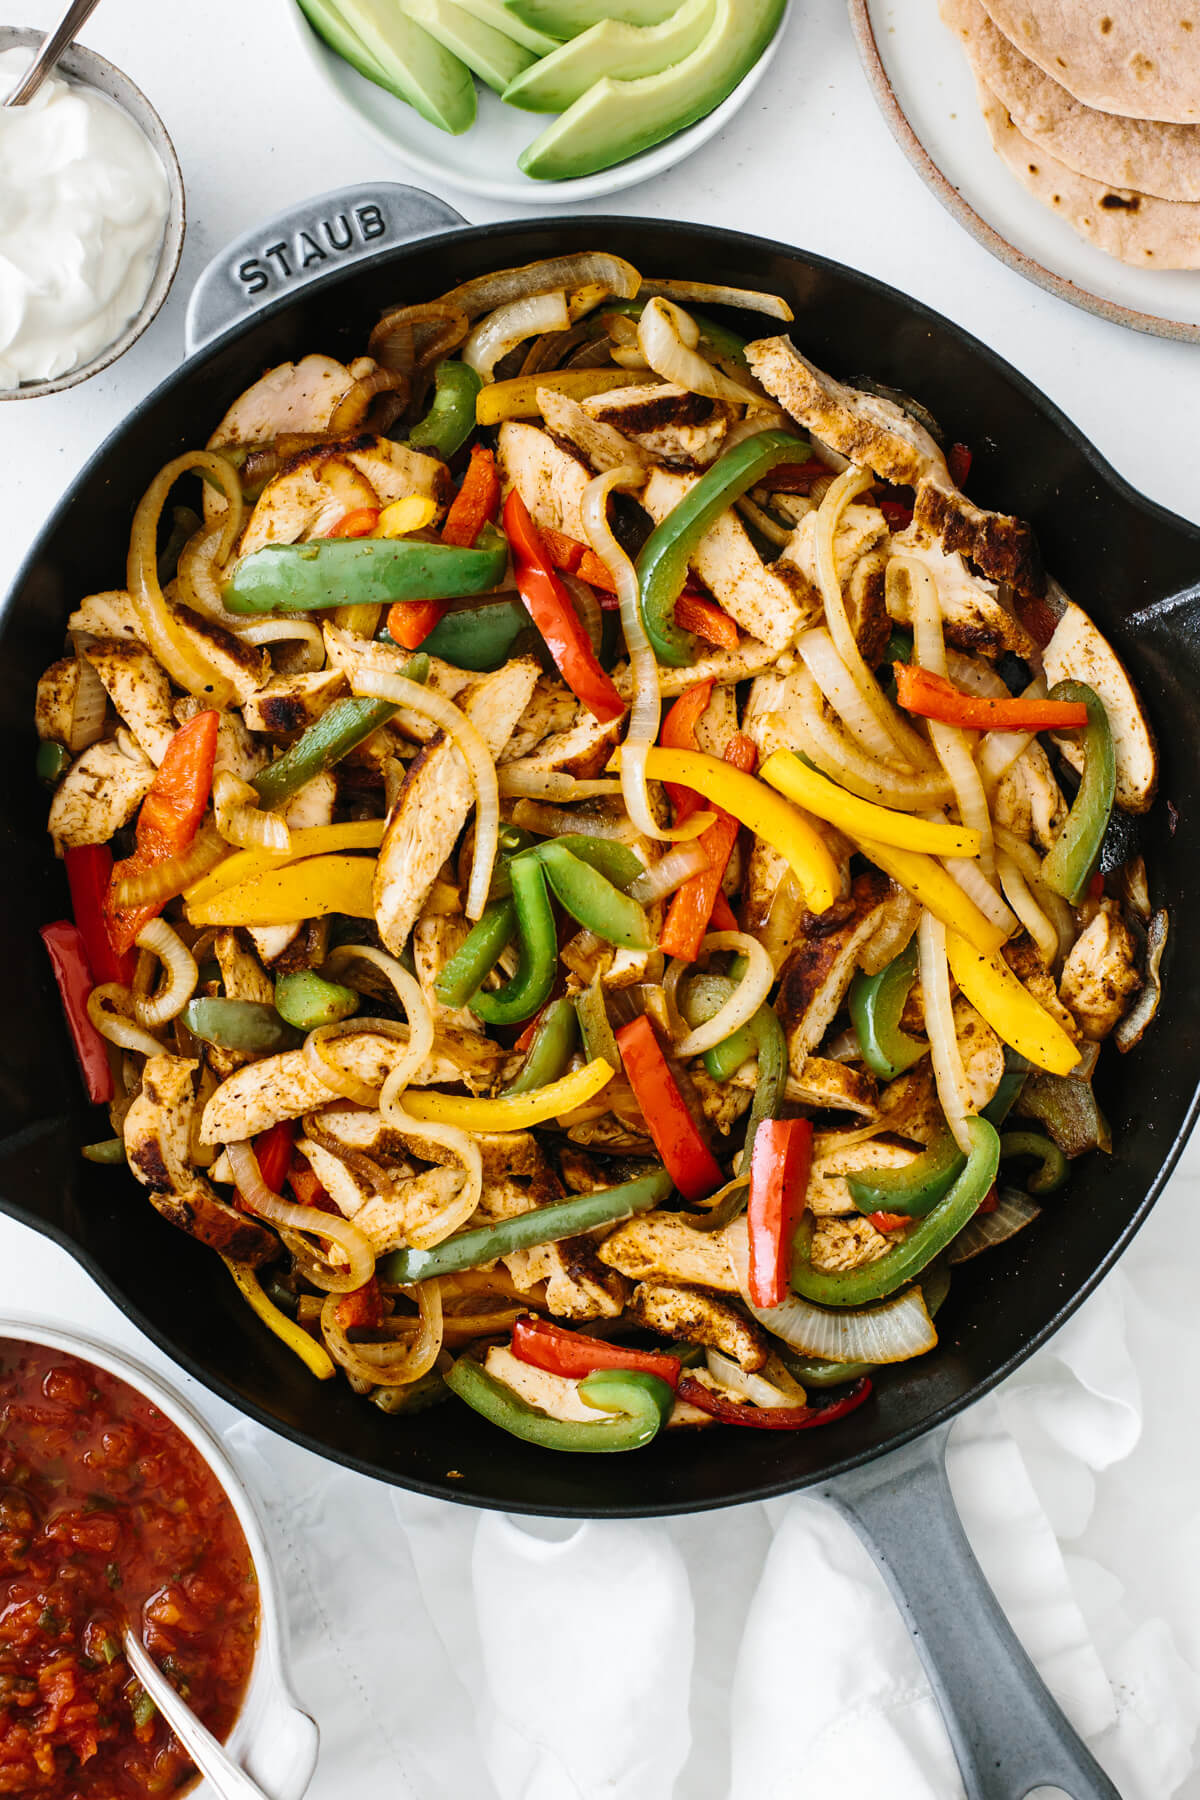 Chicken fajitas in a pan on a table with toppings.